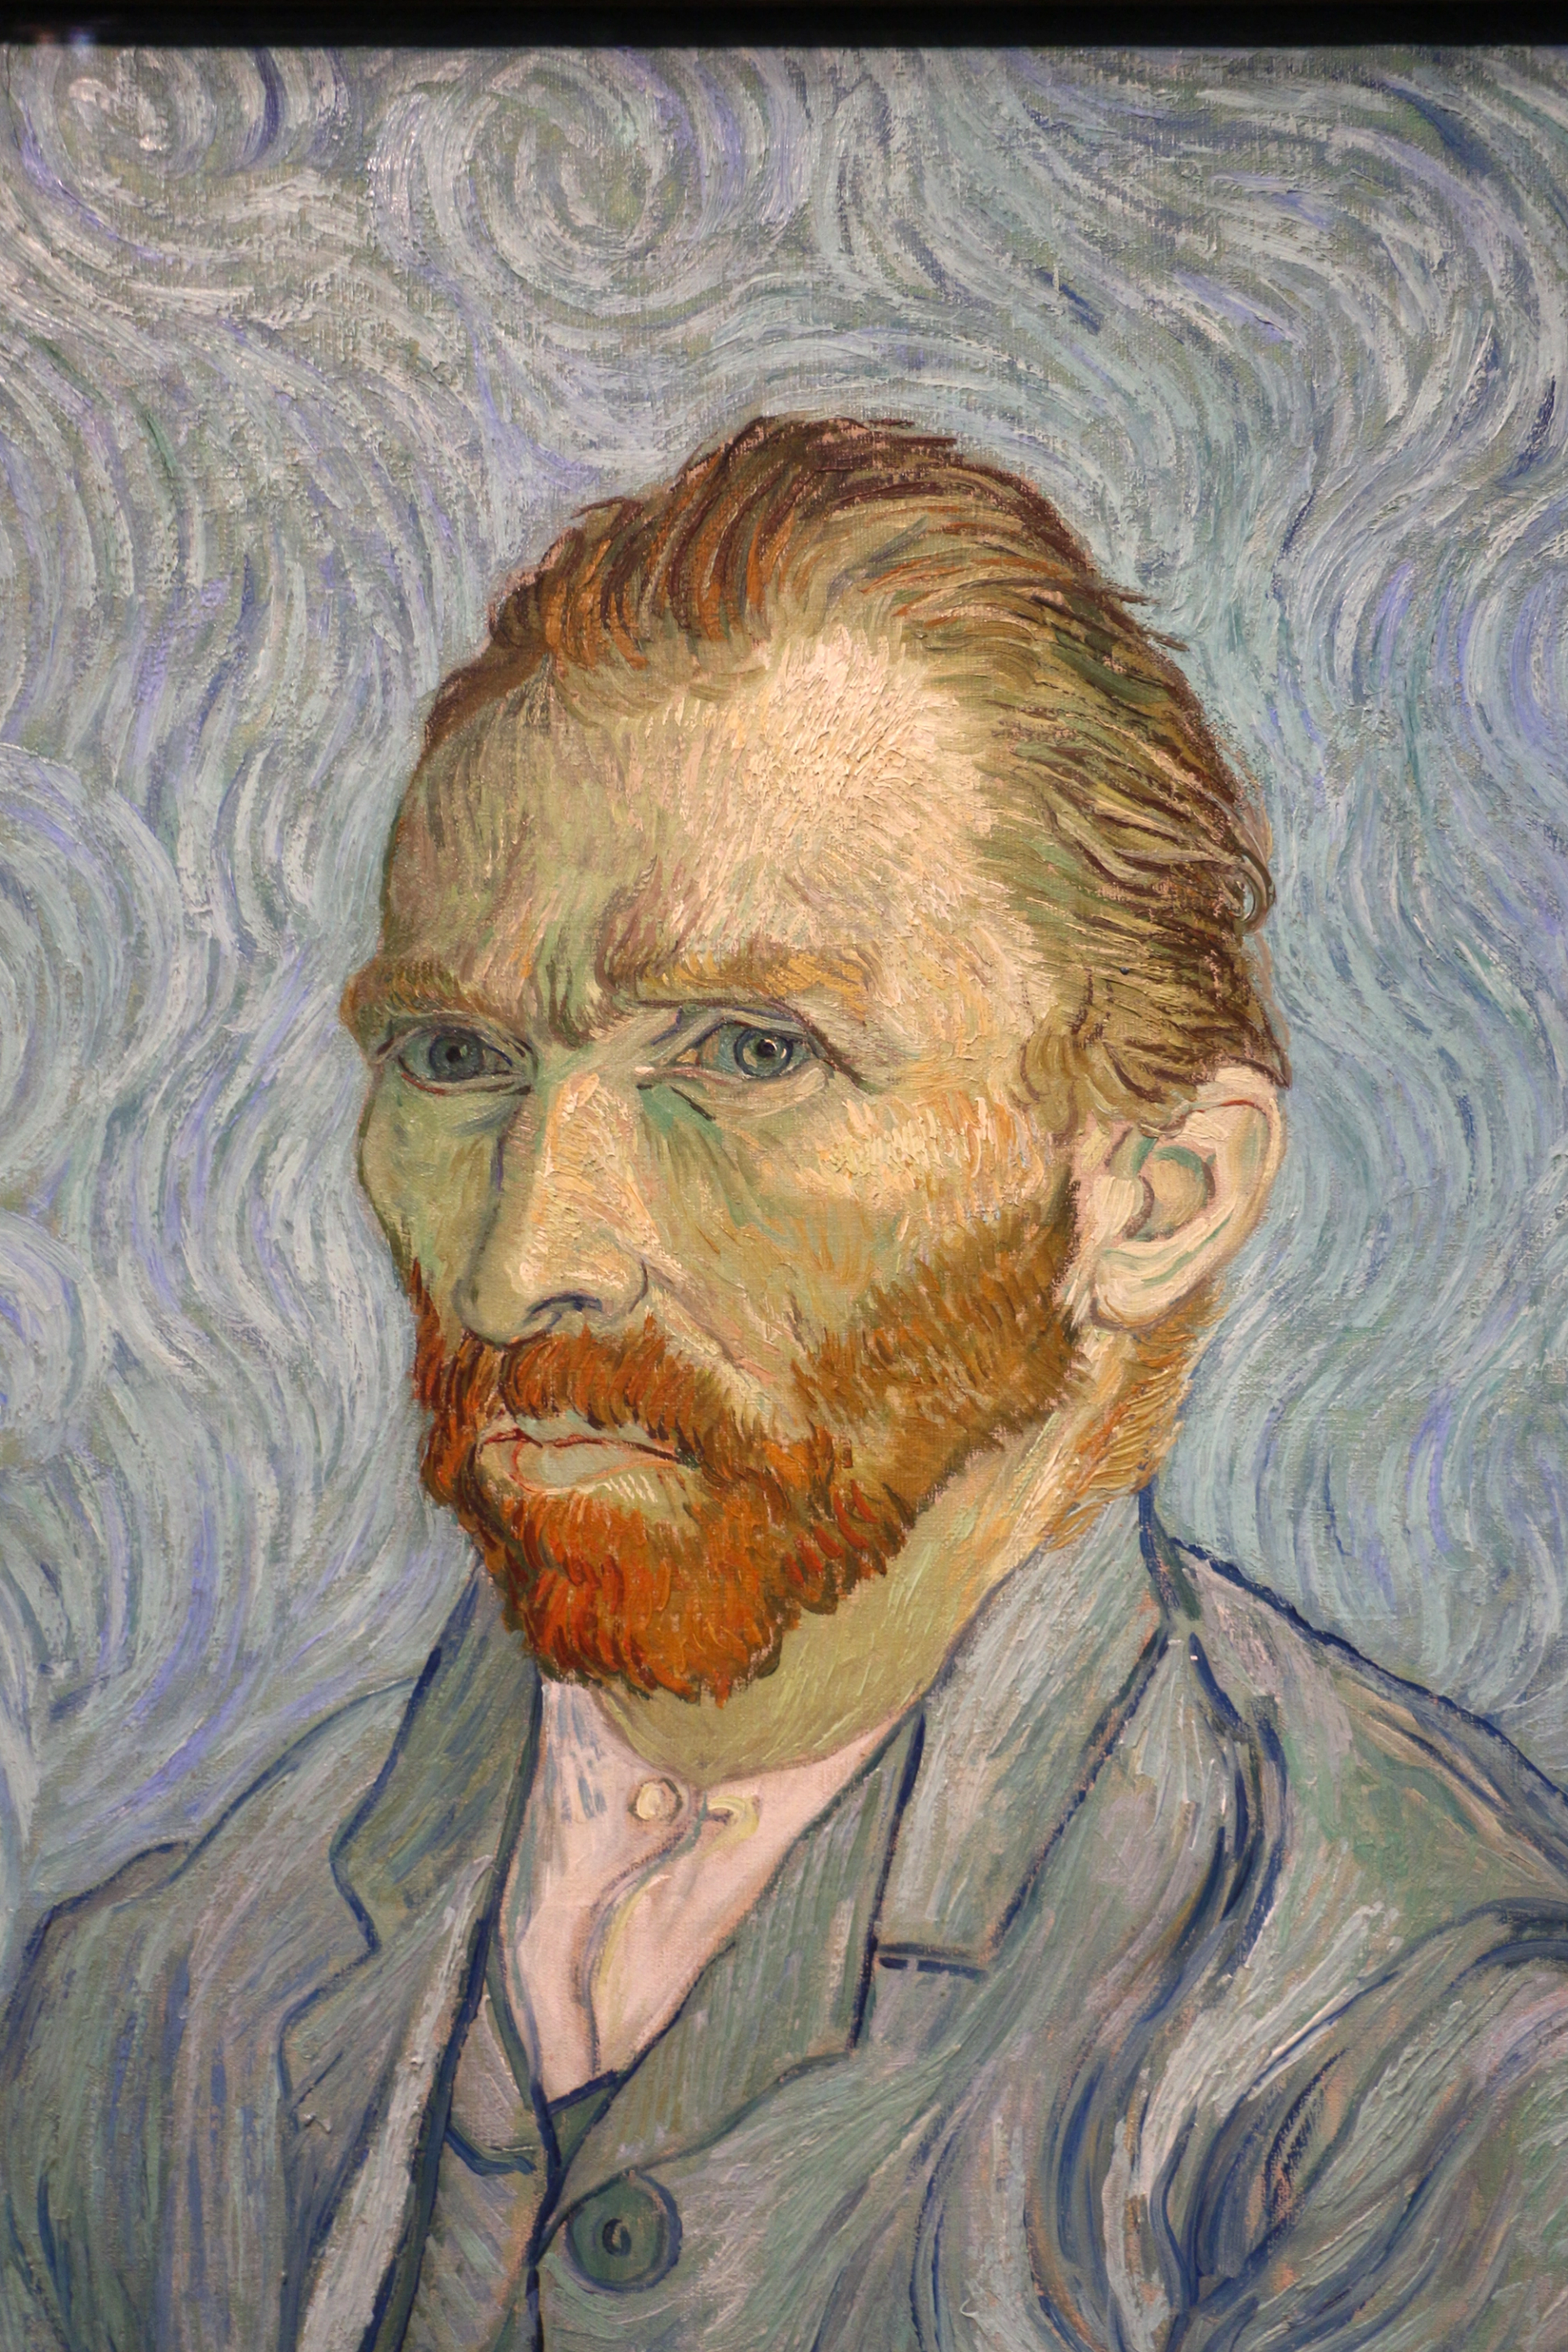 A self-portrait of Vincent van Gogh, with his signature red hair and beard. He is wearing a blue suit against a blue background and gazing directly at the viewer.